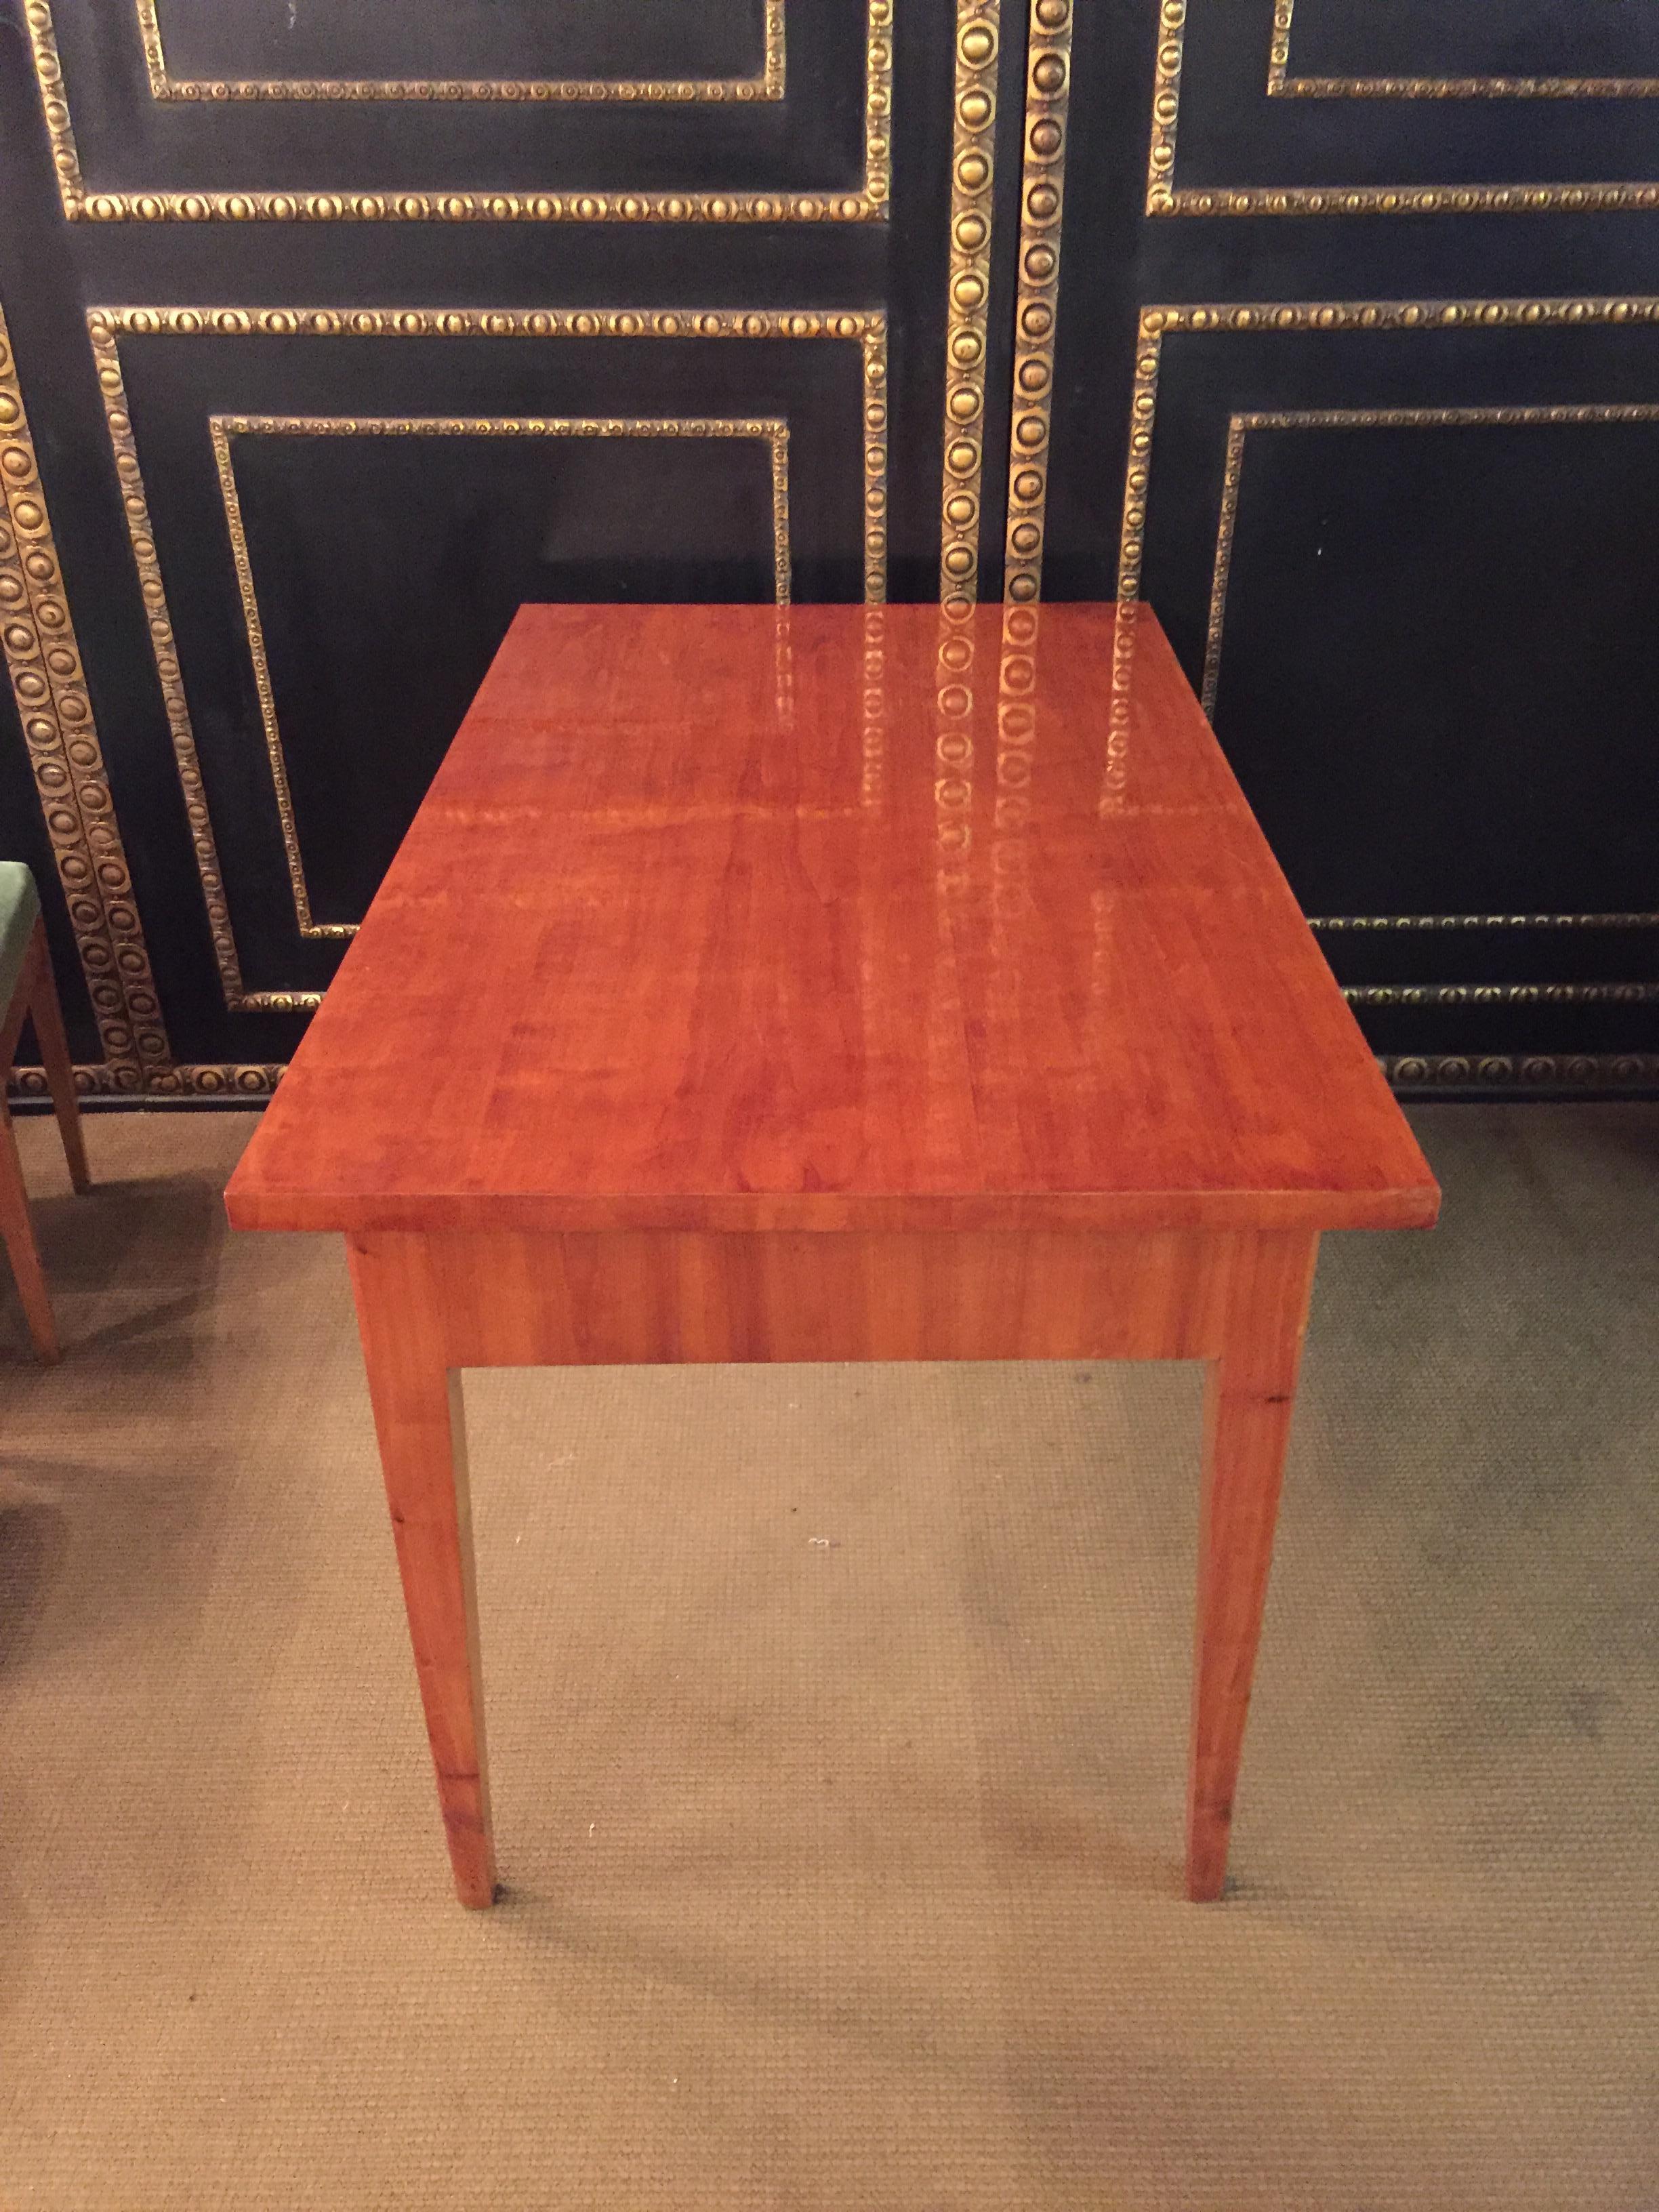 German 19th Century Original Biedermeier Dining Room /Dining Table with 4 Chairs Cherry